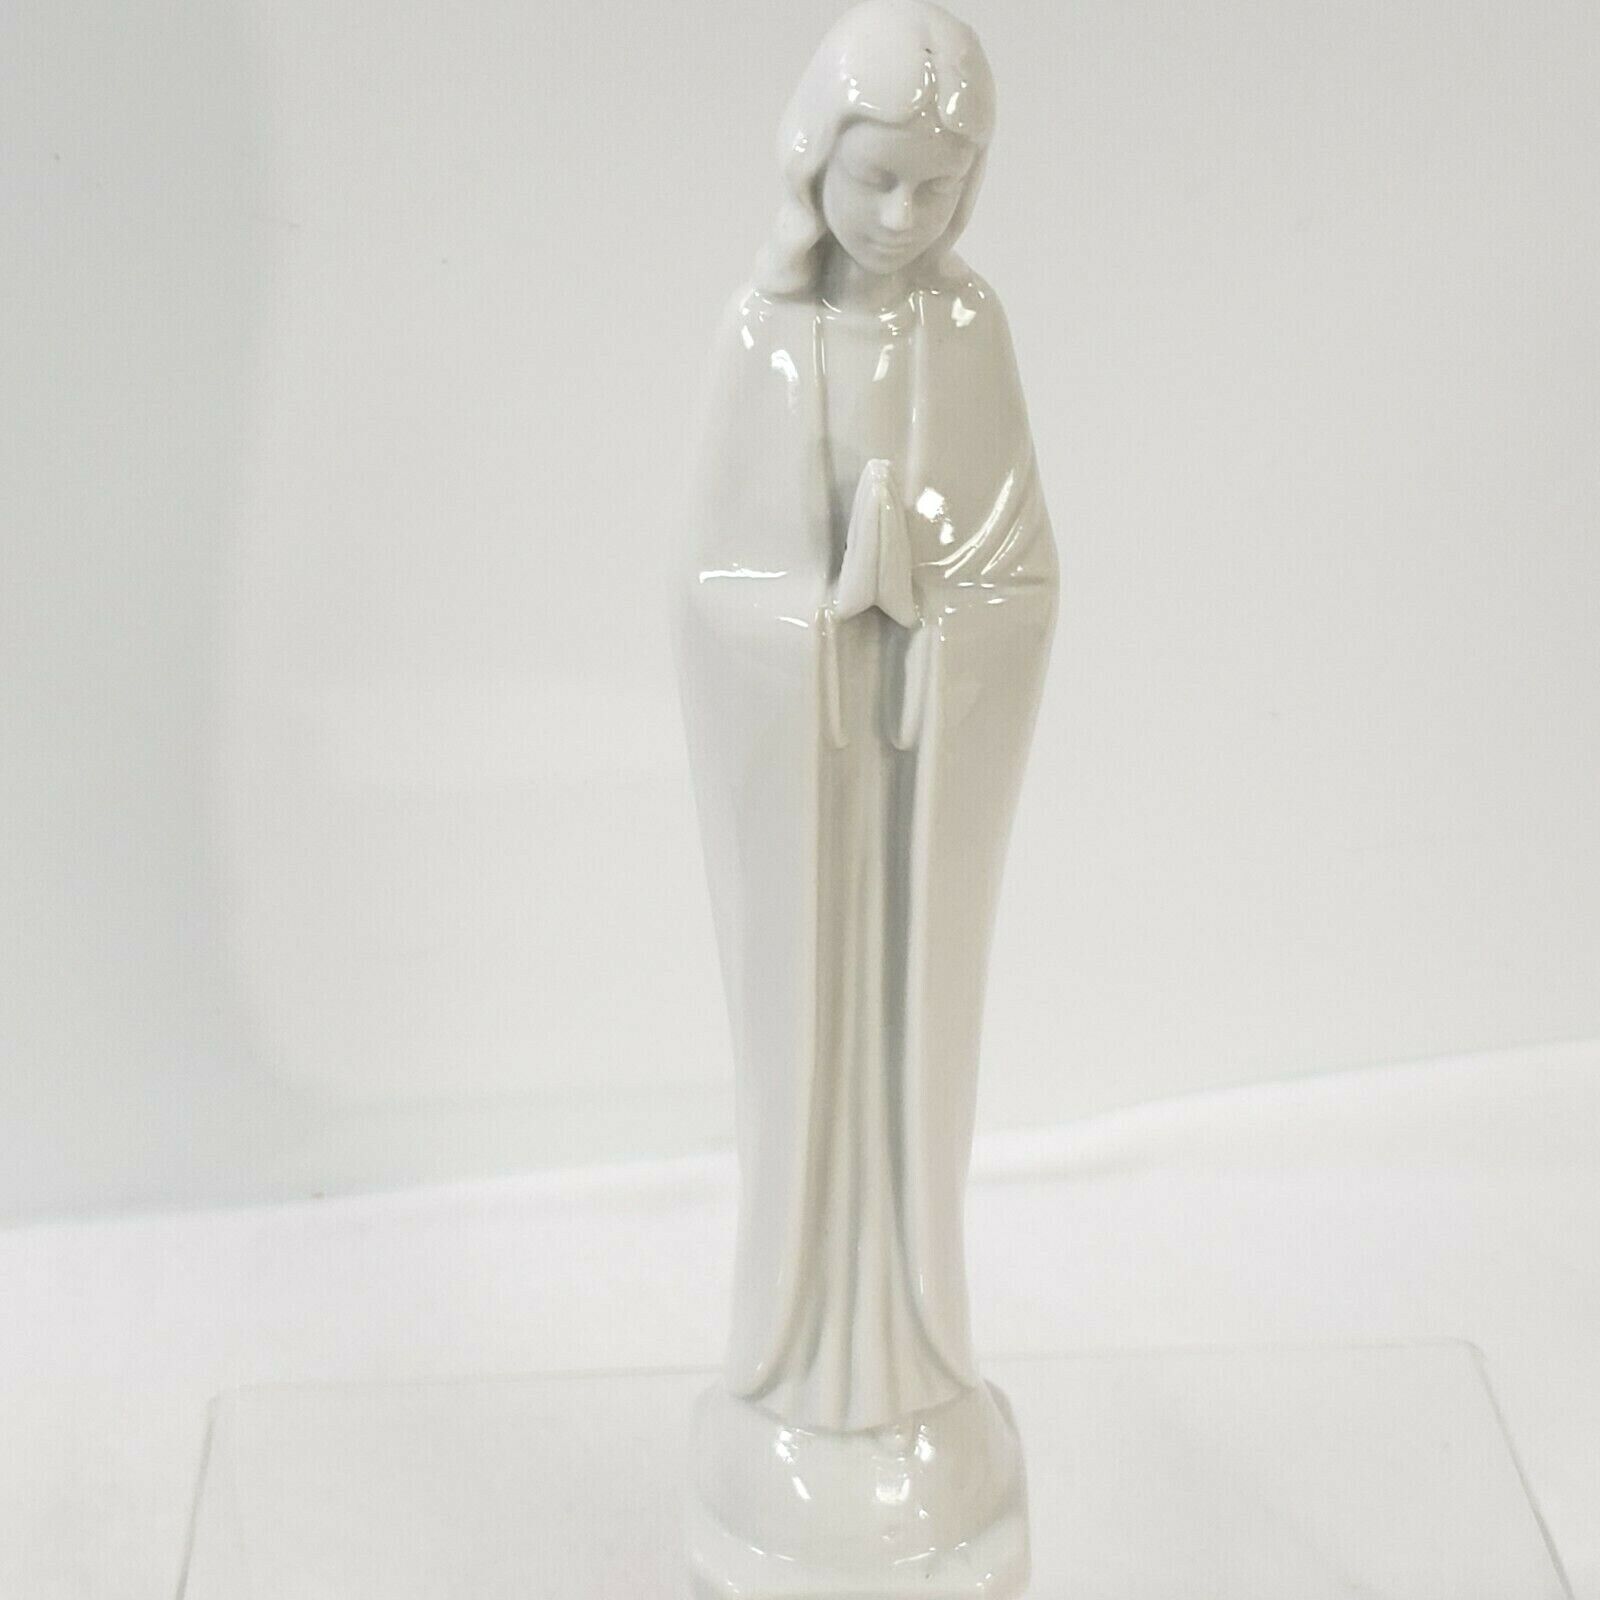  Madonna Porcelain ceramic virgin Mary Figurine Standing White 9.5in high